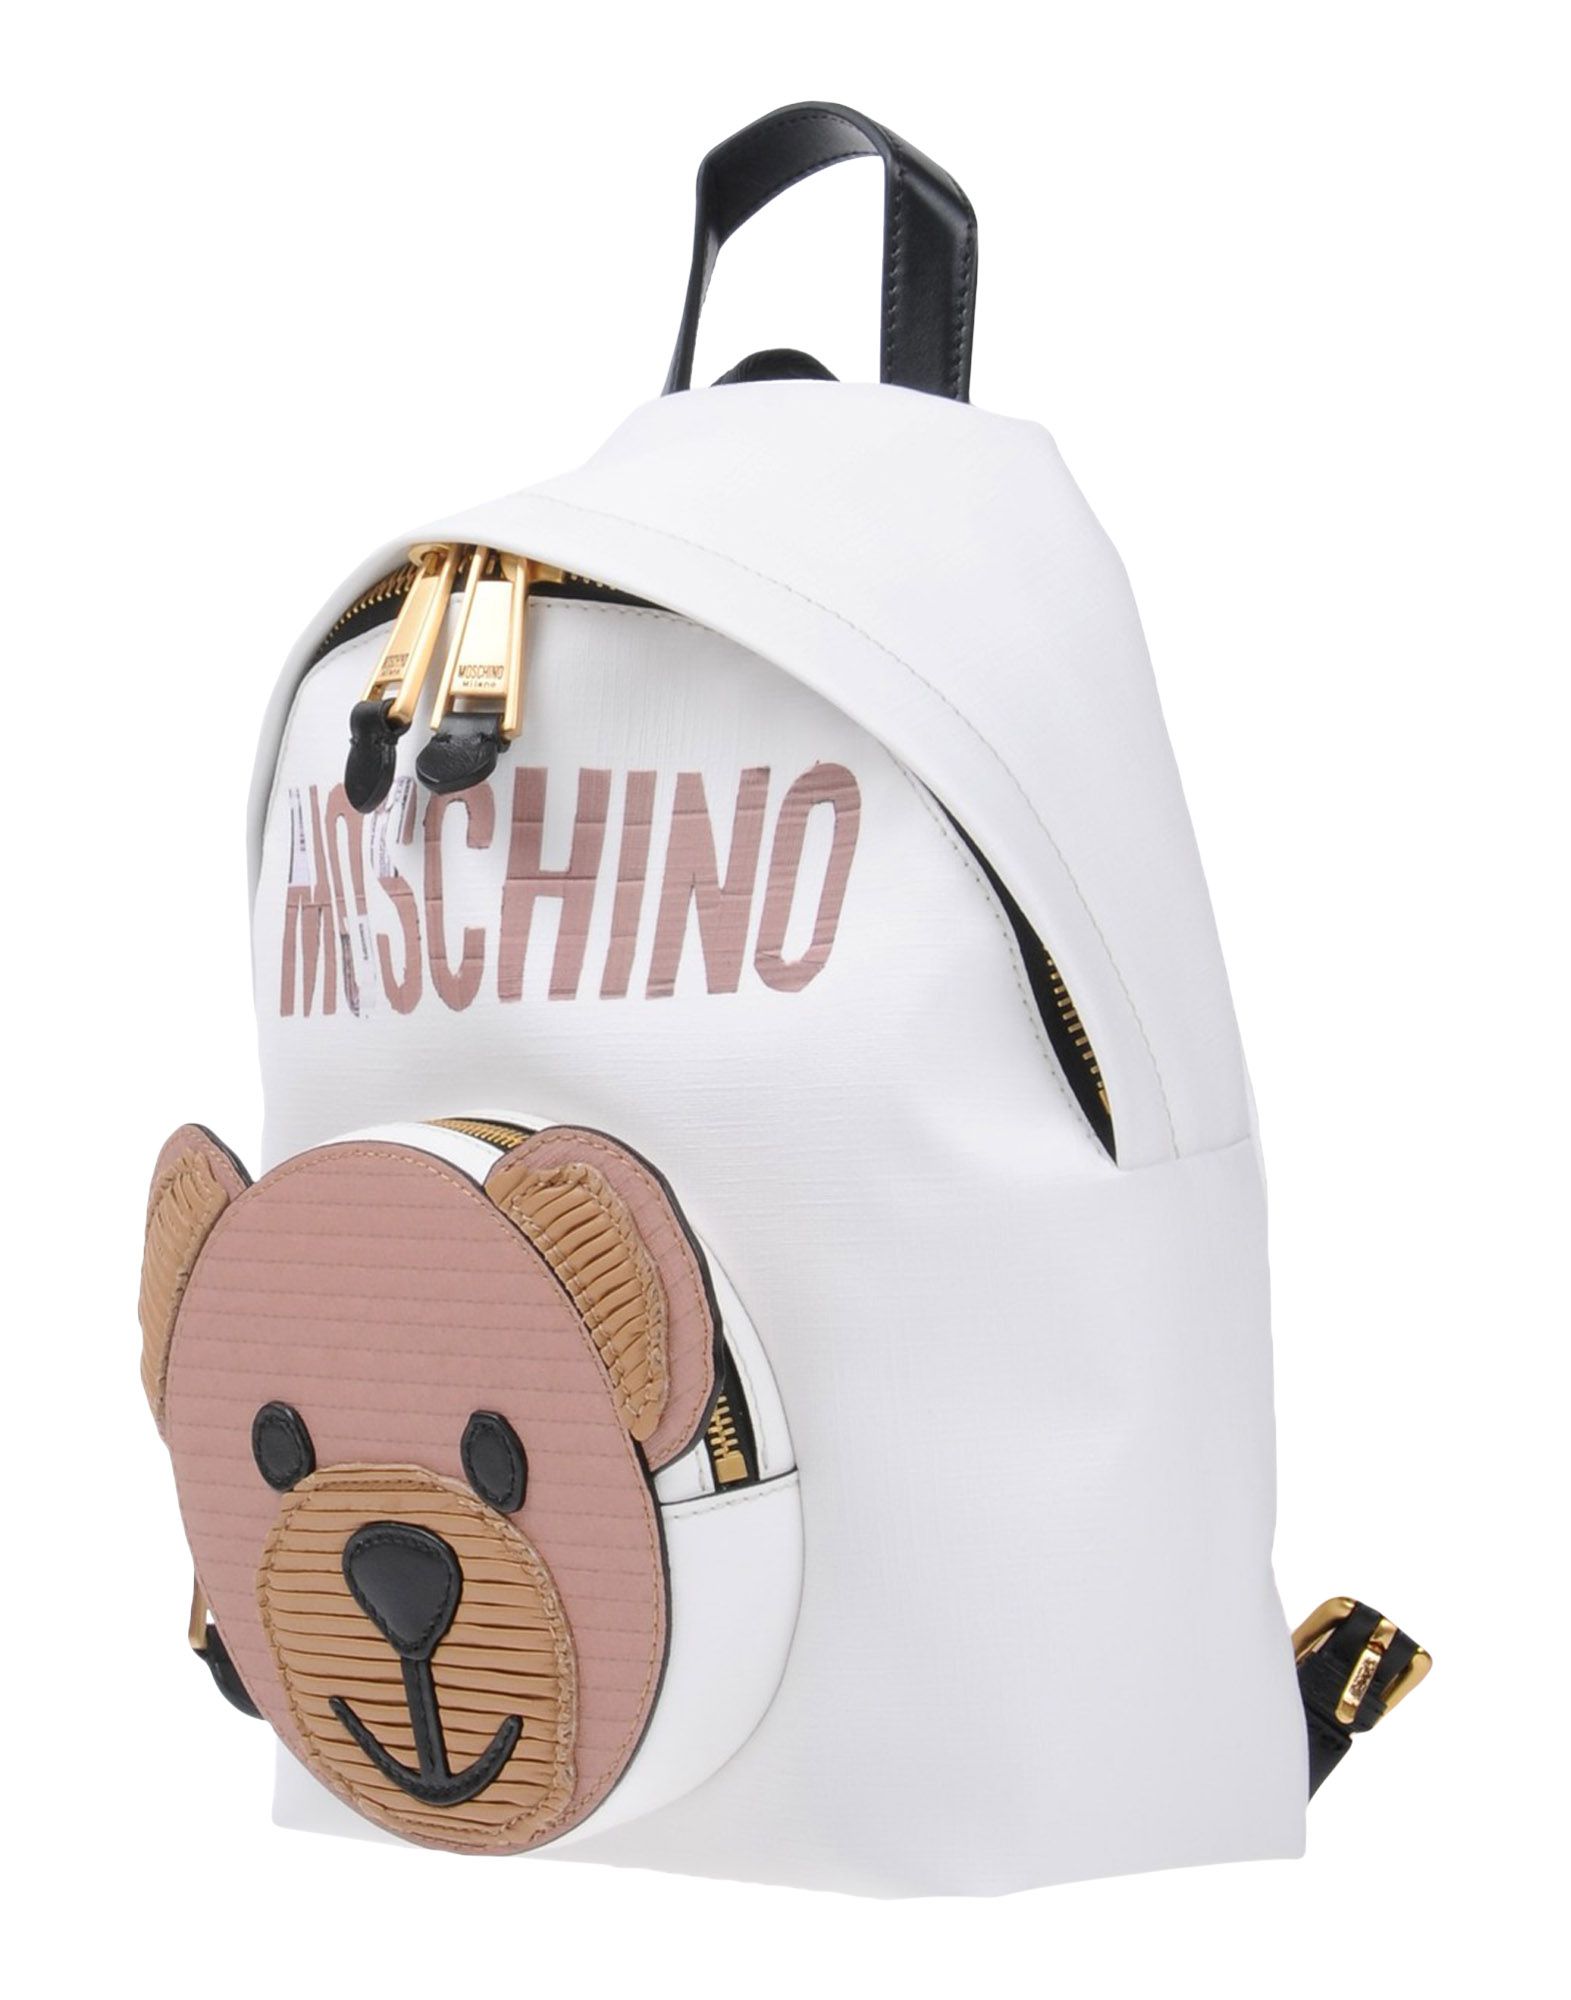 MOSCHINO Backpack & fanny pack,45399258SU 1